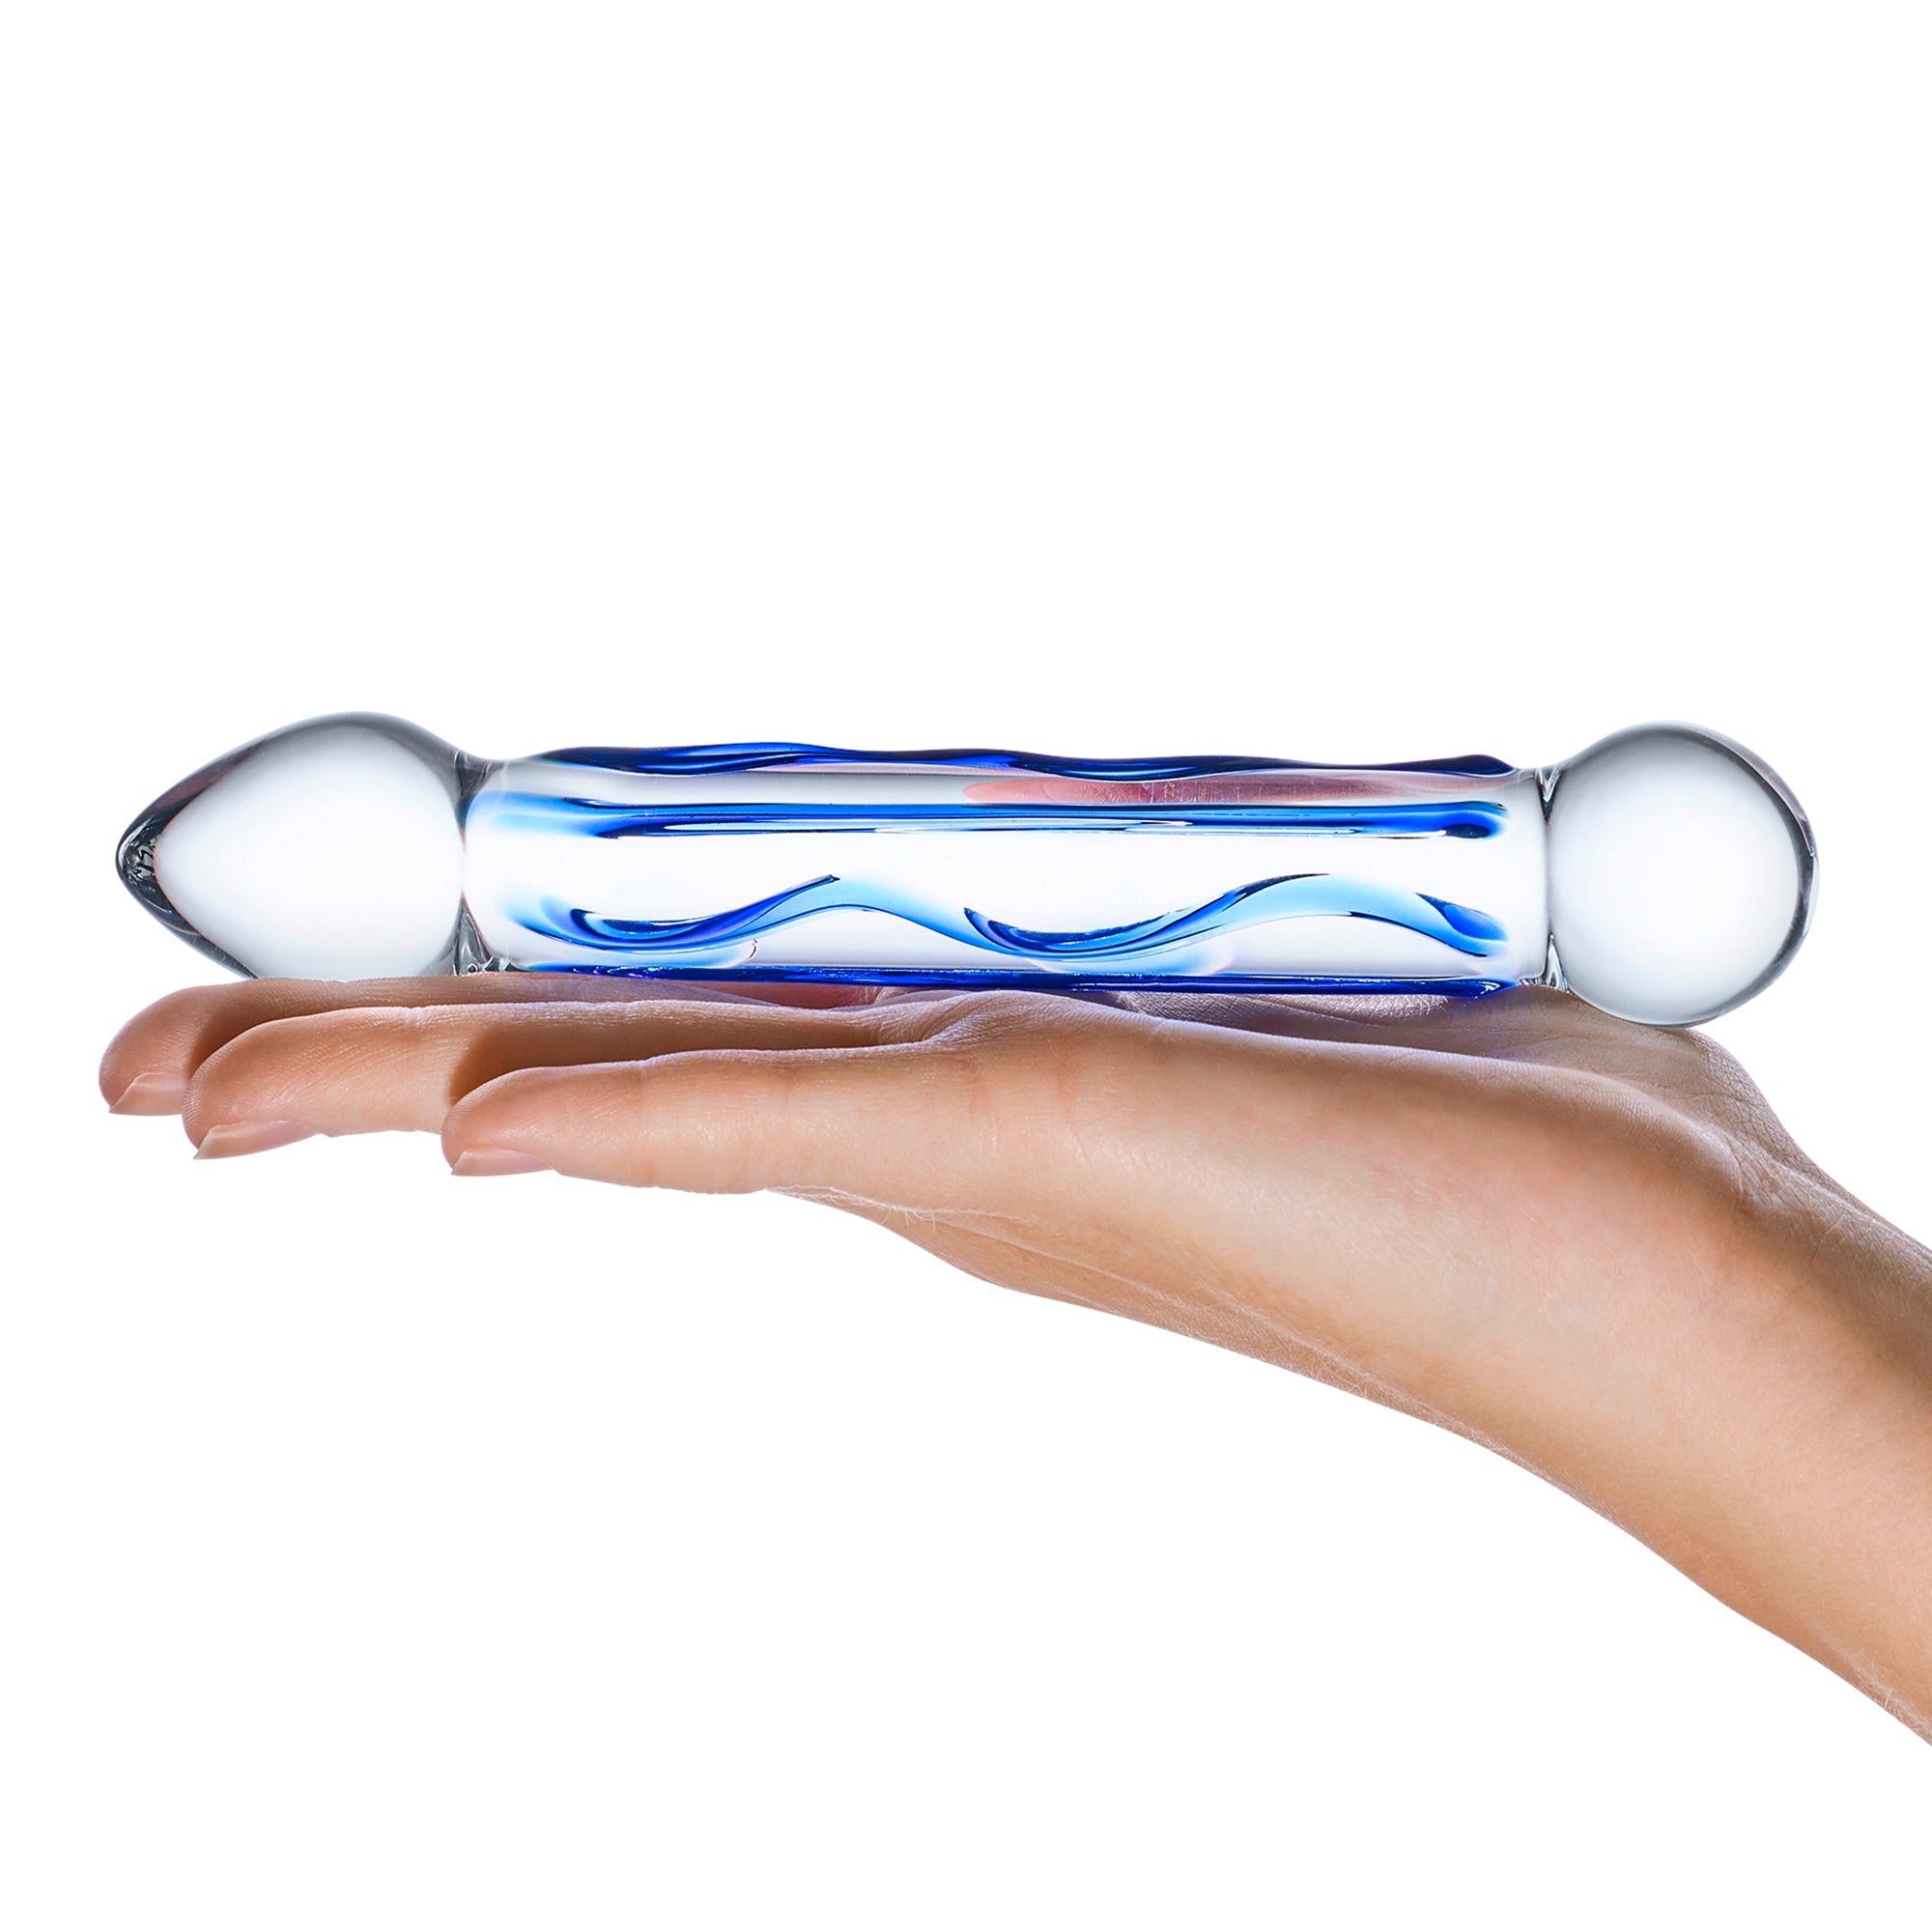 Glas - Tip Textured Glass Dildo 6.5" (Clear)